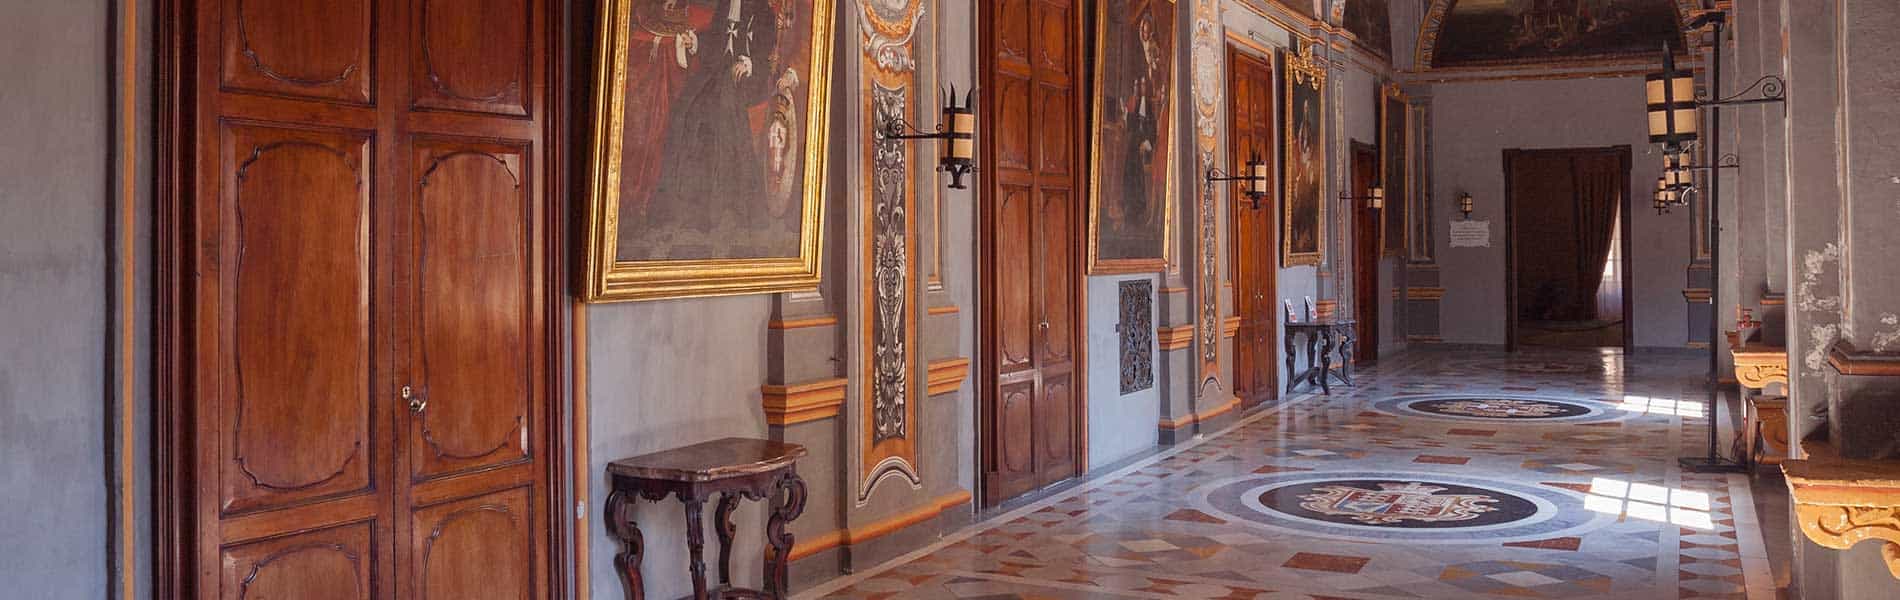 Halls of the Grandmaster's Palace: One of many reasons to visit Malta.